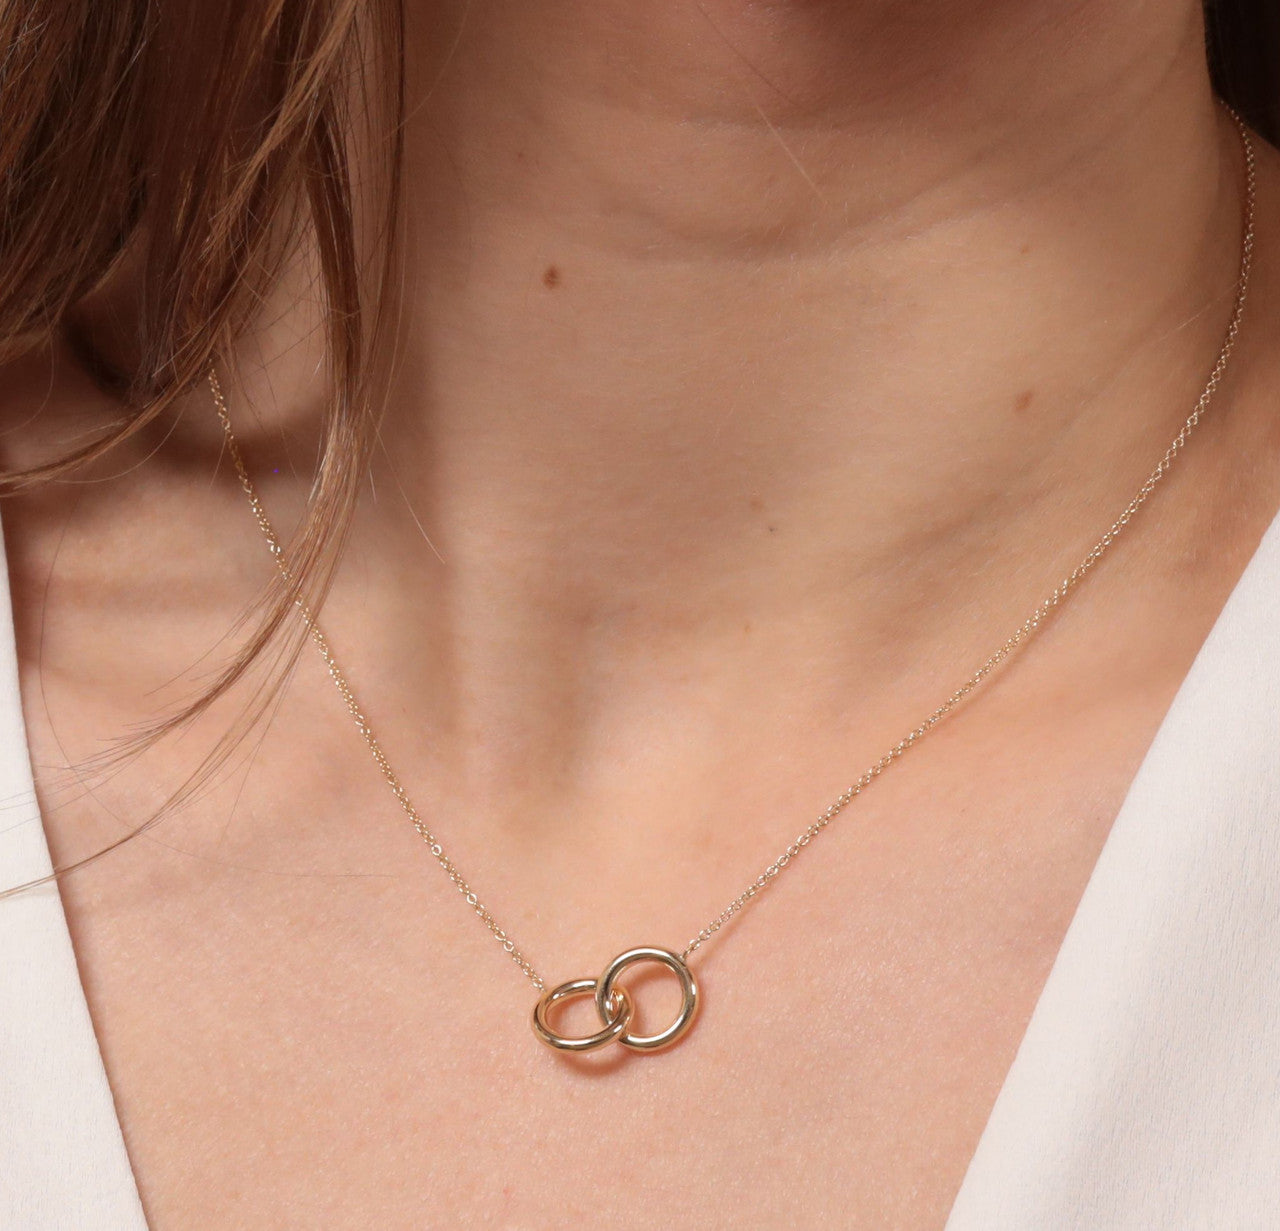 Linked Gold & Silver Circle Necklace - Handmade Jewelry by Lila Clare